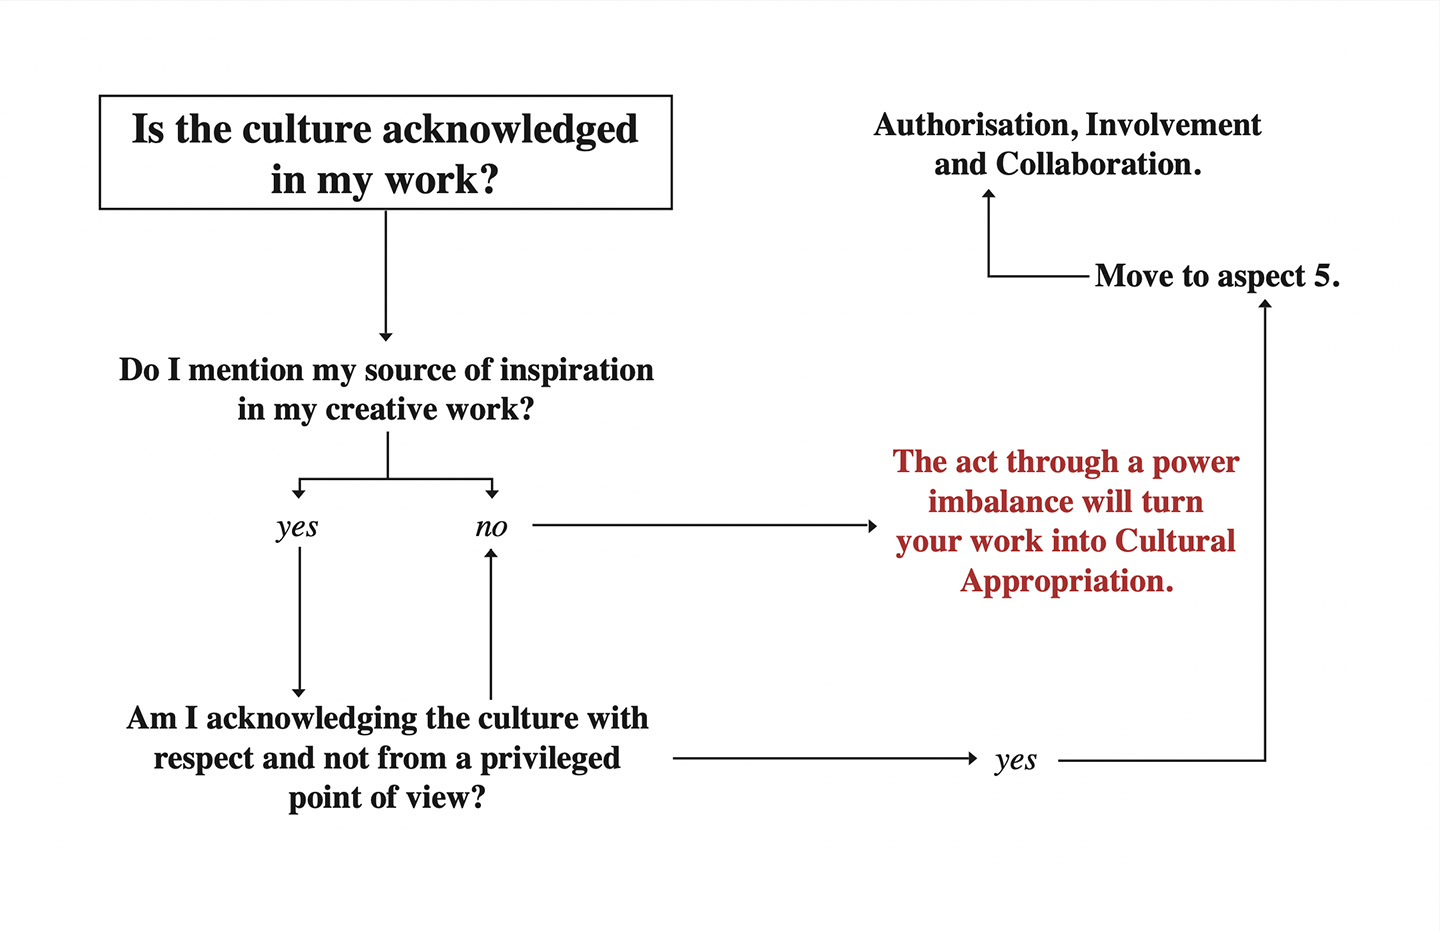 Cultural Appropriation - Istituto Marangoni - Acknowledgment and Attribution of the Culture